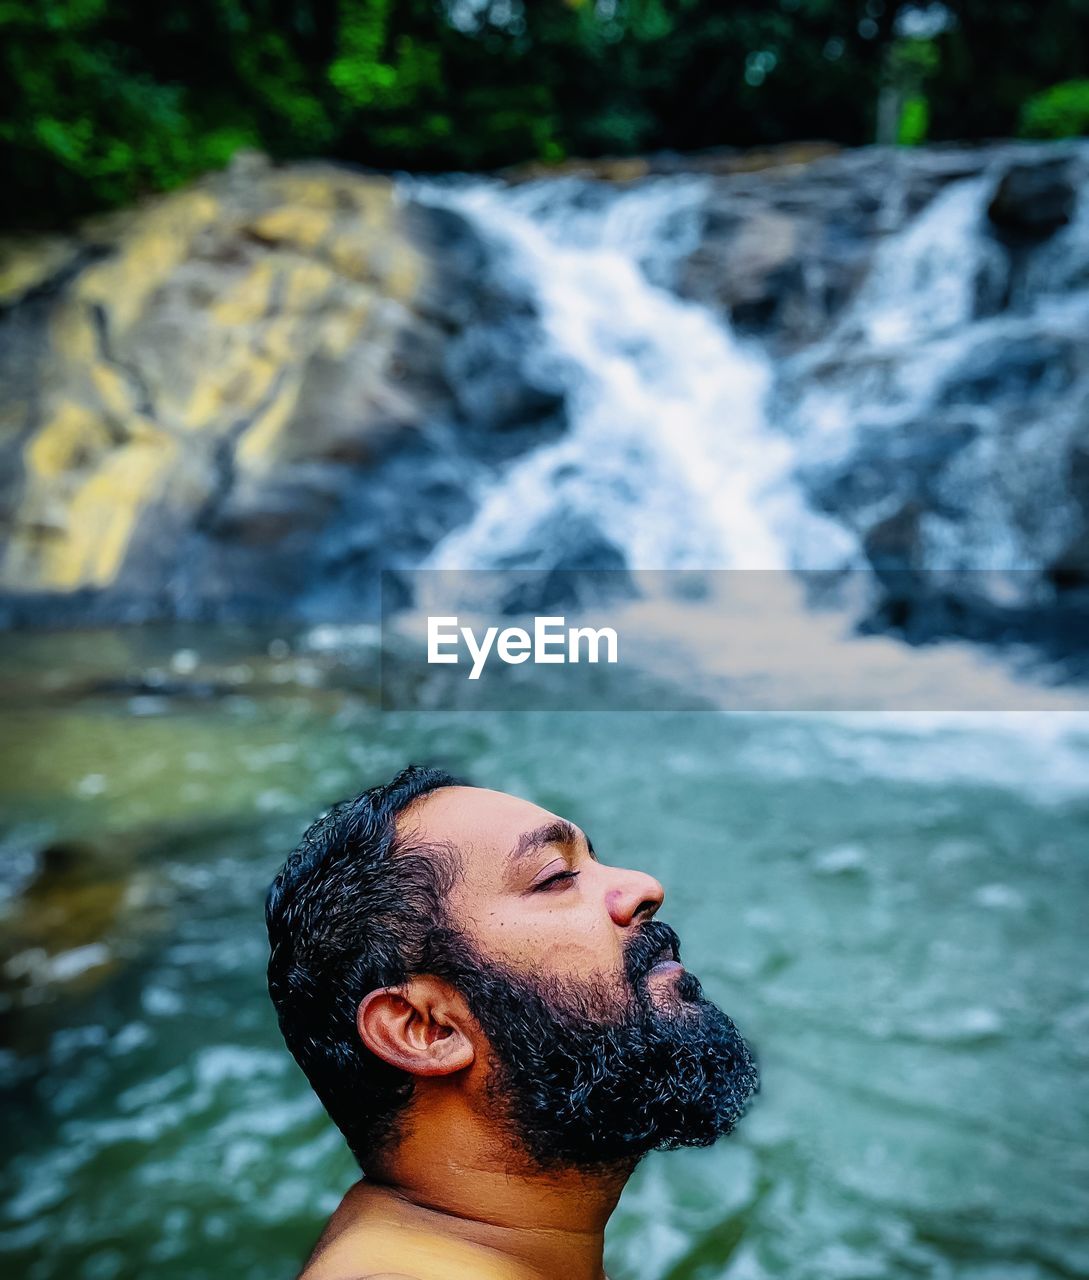 water, waterfall, one person, headshot, nature, portrait, young adult, adult, men, beauty in nature, motion, river, leisure activity, beard, outdoors, rock, facial hair, lifestyles, flowing water, swimming, human face, day, relaxation, scenics - nature, sports, vacation, trip, environment, forest, holiday, wet, side view, enjoyment, looking up, person, looking, focus on foreground, land